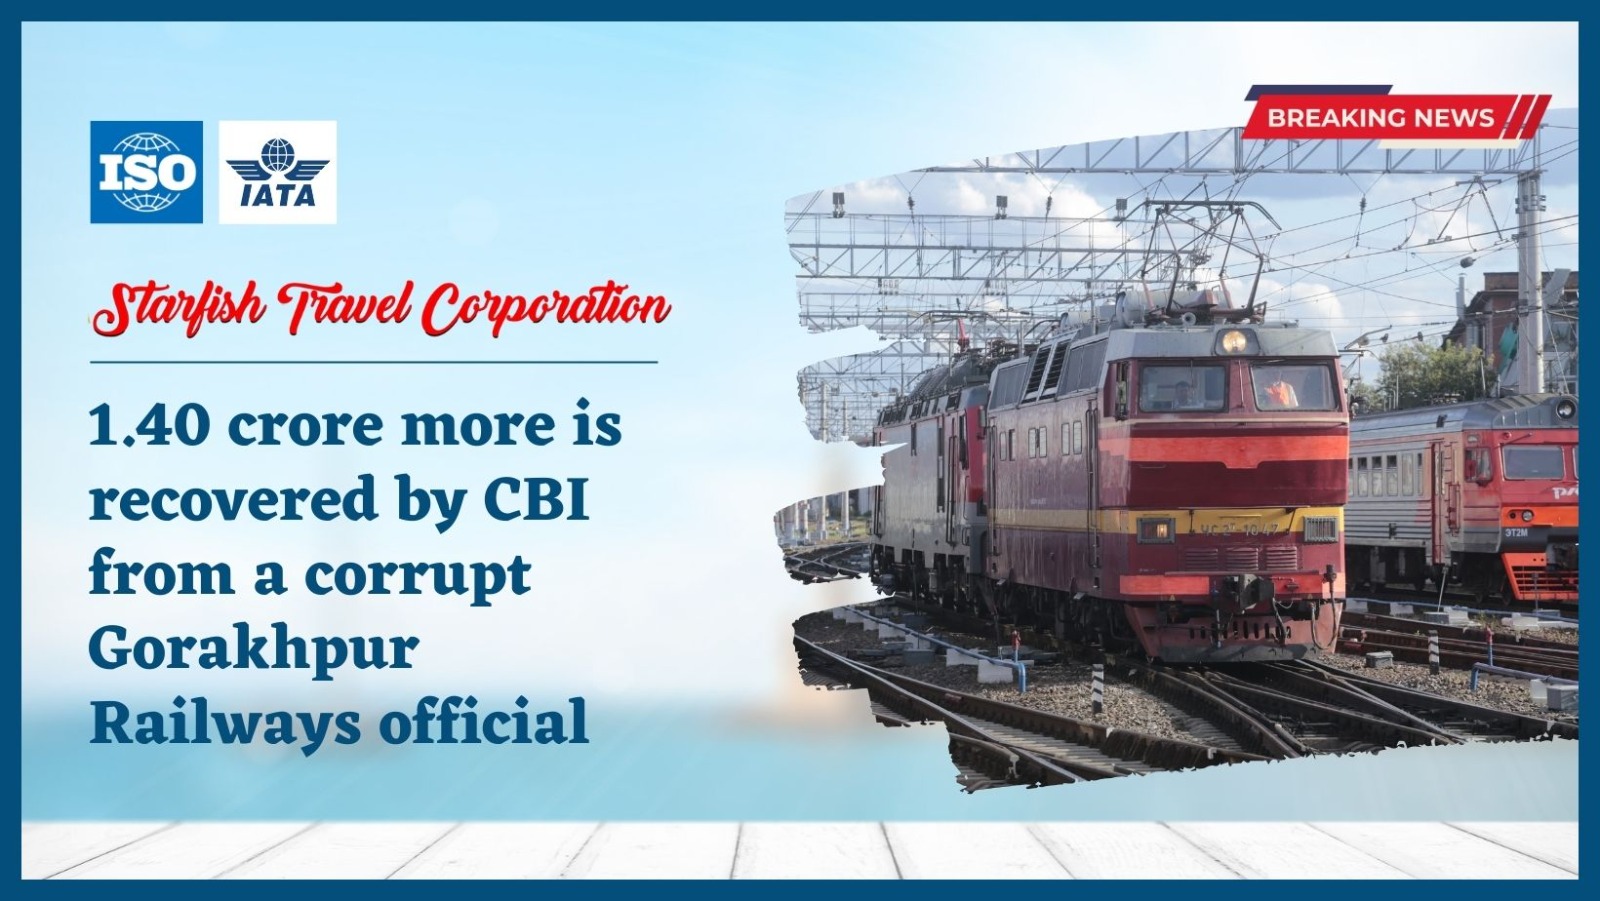 1.40 crore more is recovered by CBI from a corrupt Gorakhpur Railways official